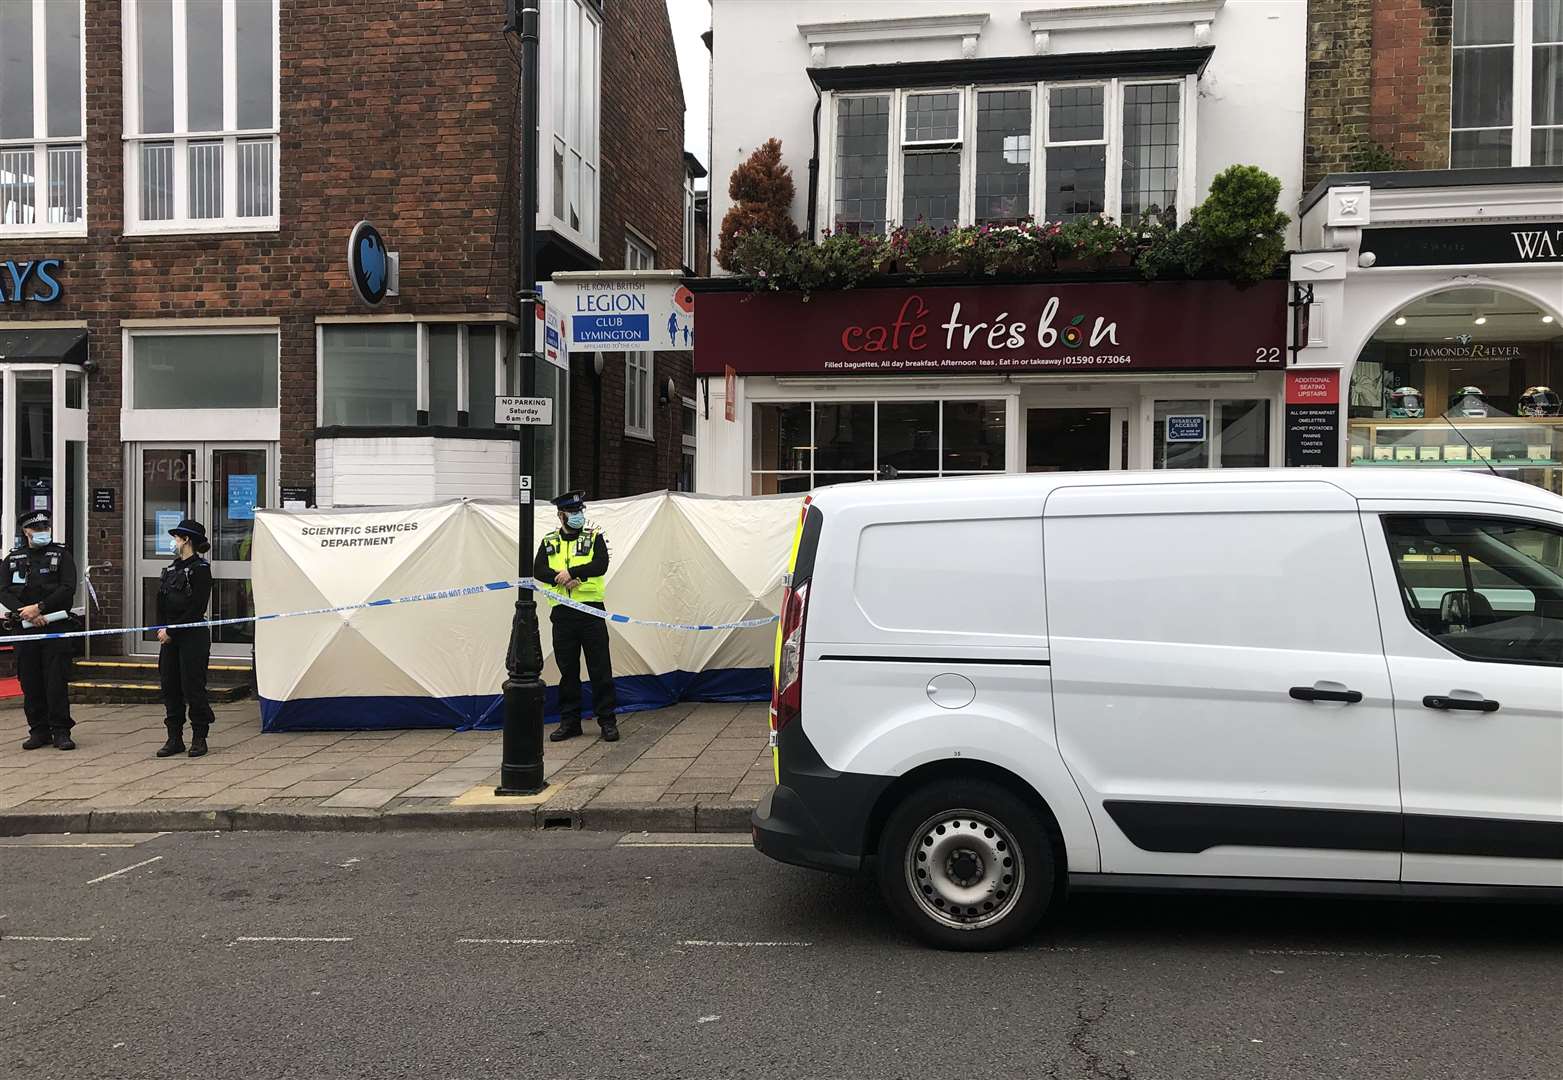 Police said four people have been arrested in connection with the incident (Brian Farmer/PA)